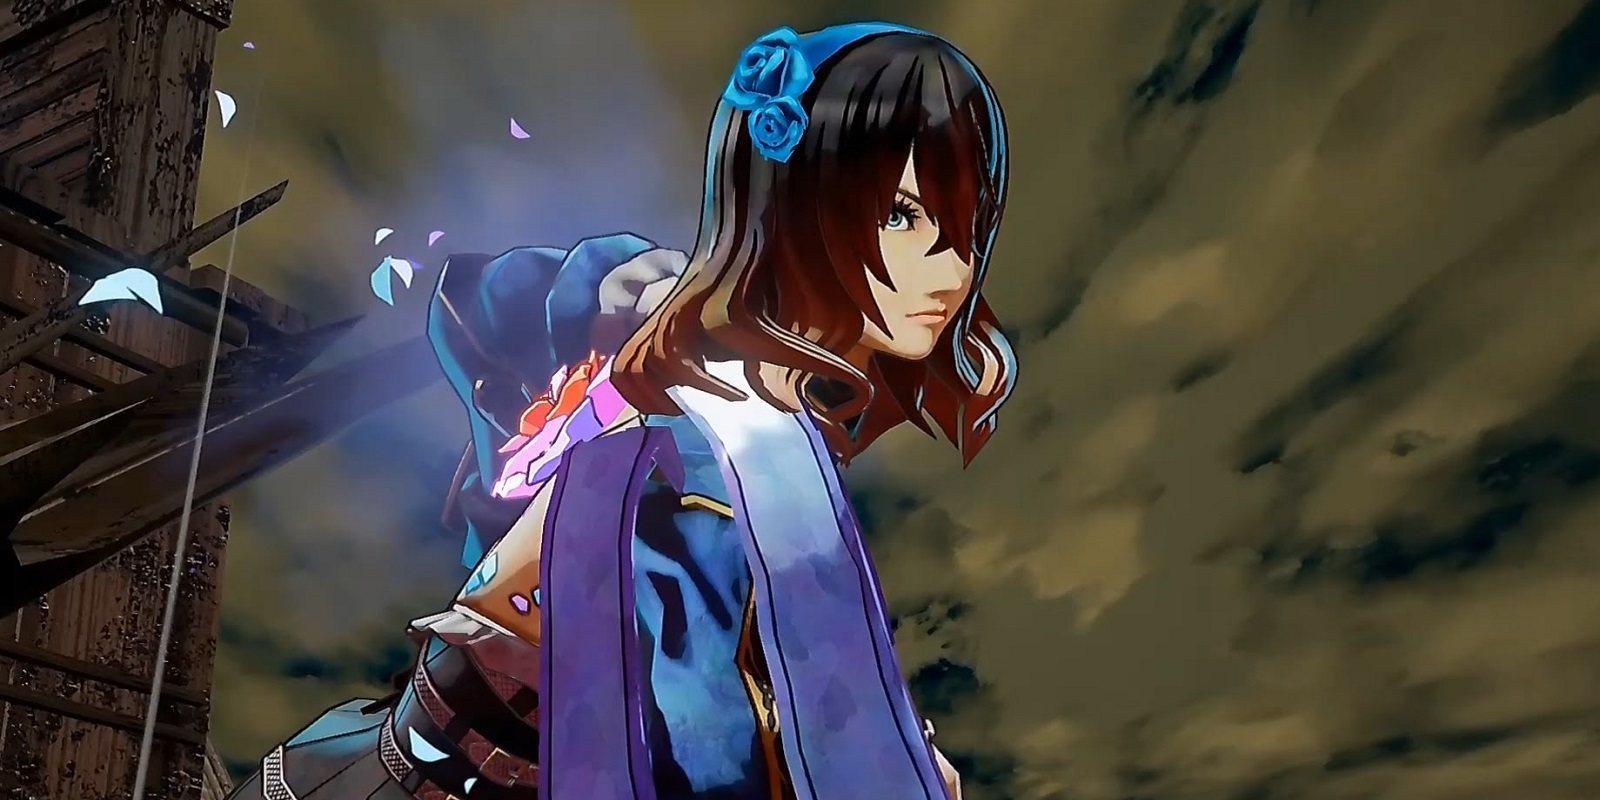 'Bloodstained: Ritual of the Night' se retrasa hasta 2019